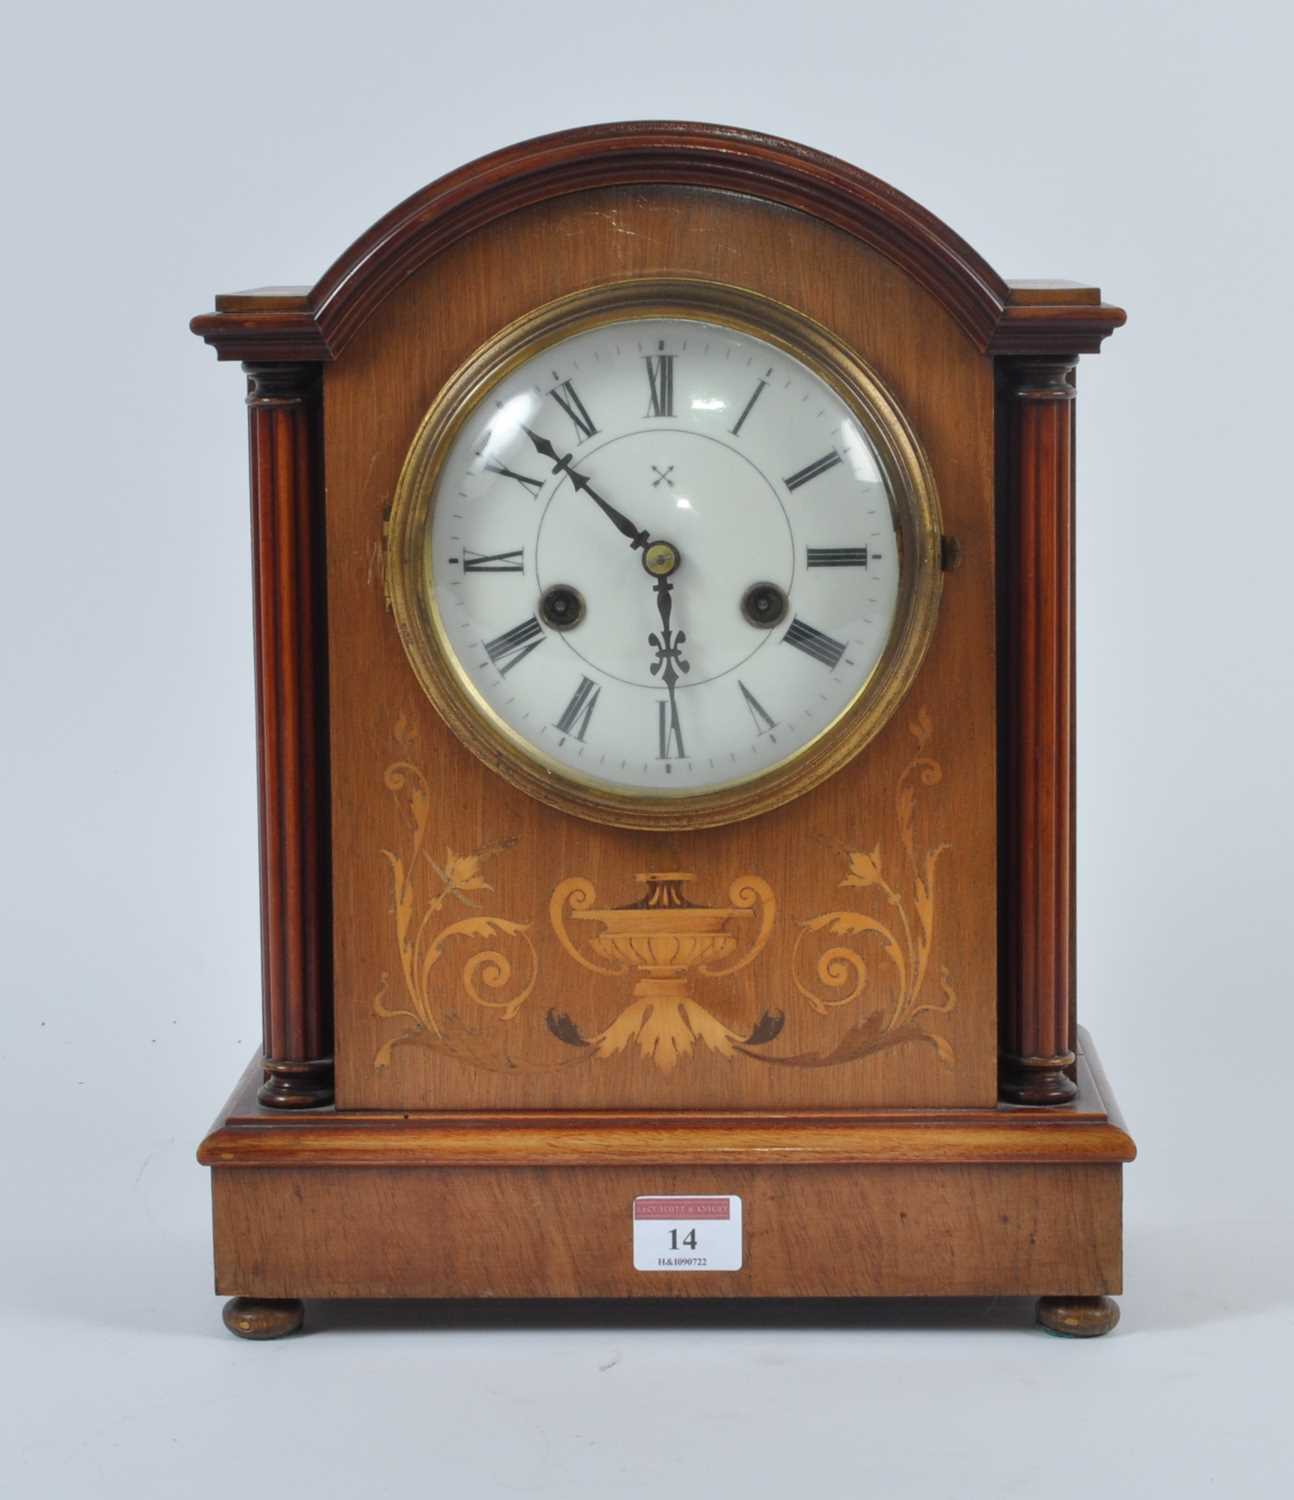 An early 20th century walnut cased eight-day mantel clock, the enamel dial showing Roman numerals,